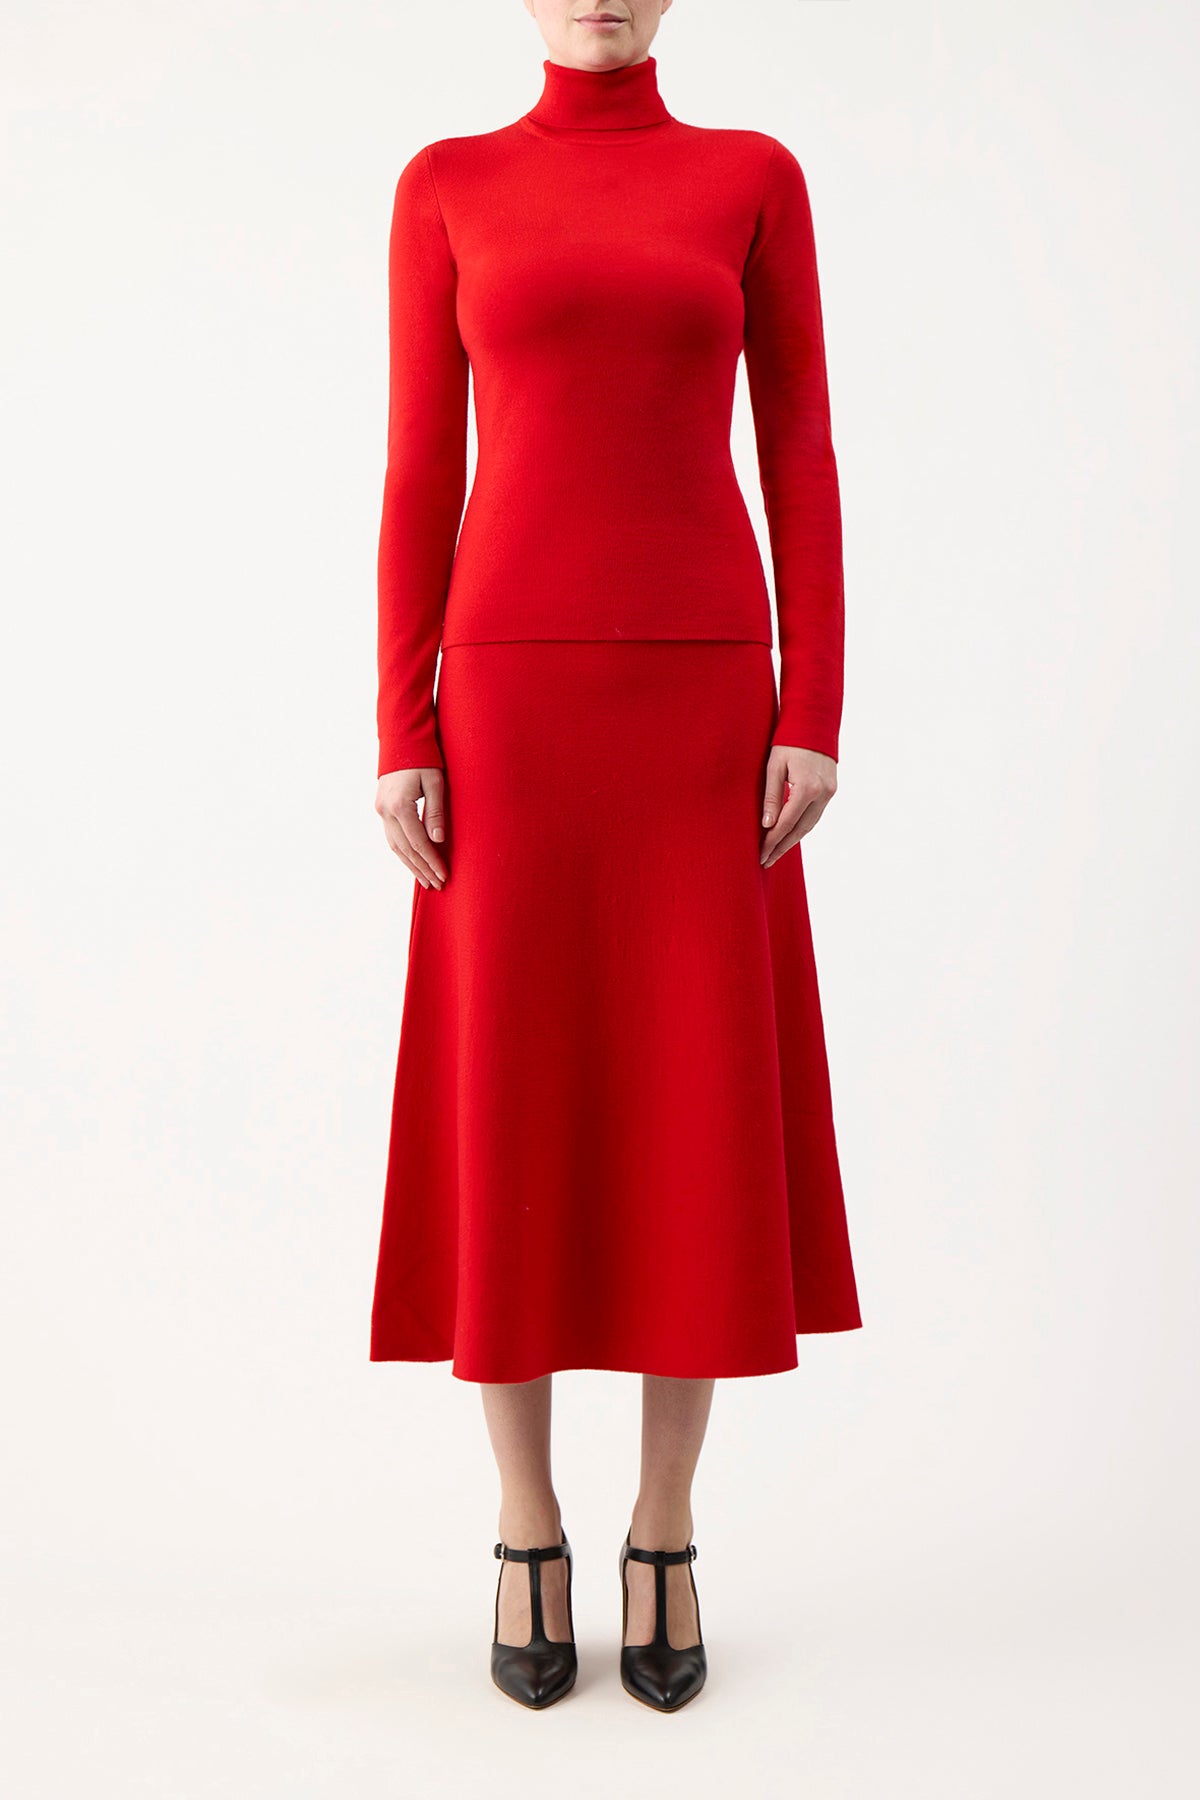 May Knit Turtleneck in Red Topaz Cashmere Wool